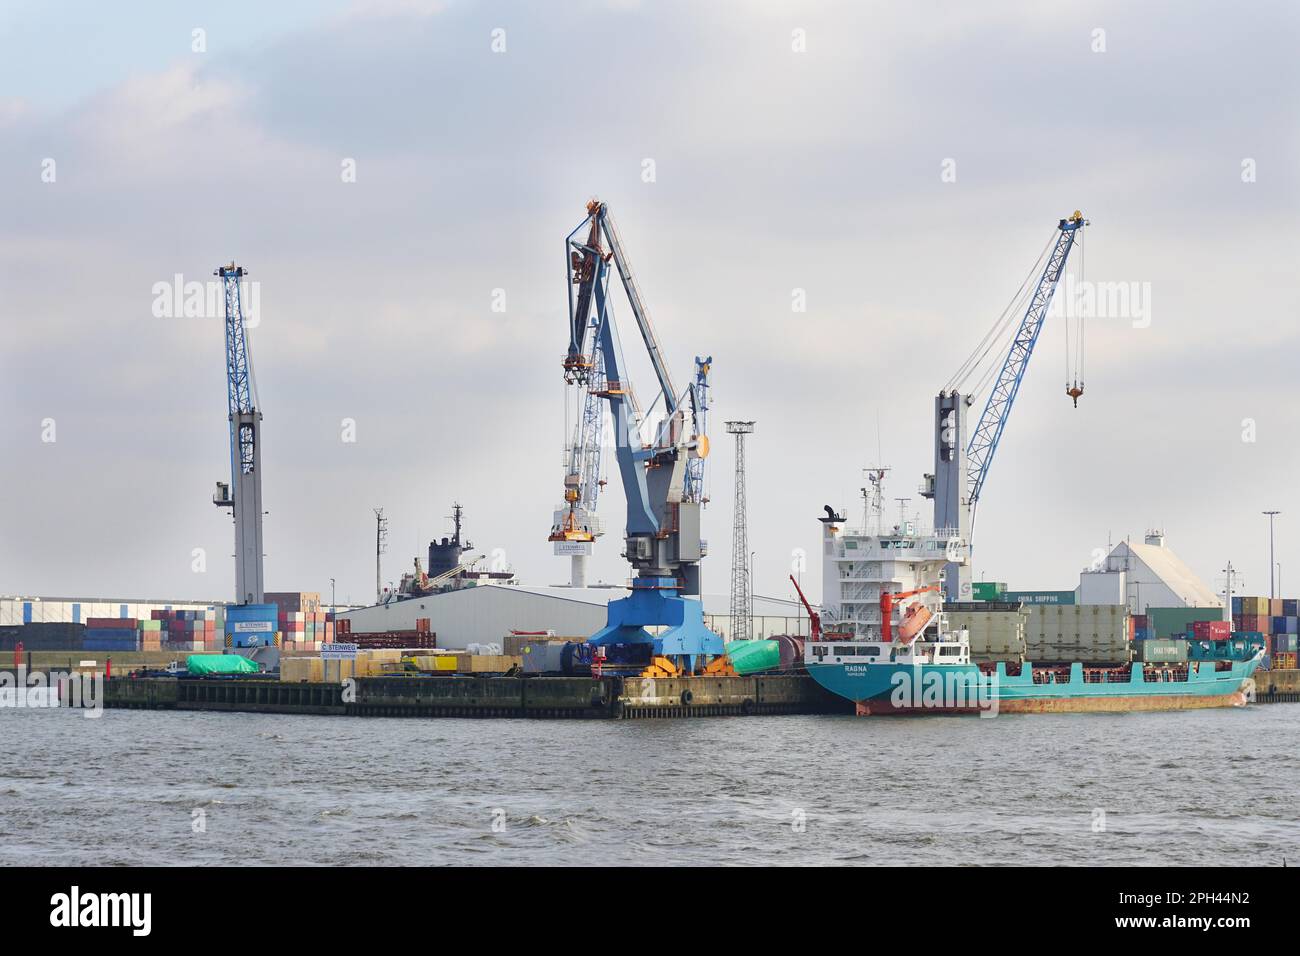 Hamburg, Germany - March 12, 2016: The Port of Hamburg (Hamburger Hafen) is Germany#39;s largest and Europe#39;s second busiest sea port after Stock Photo